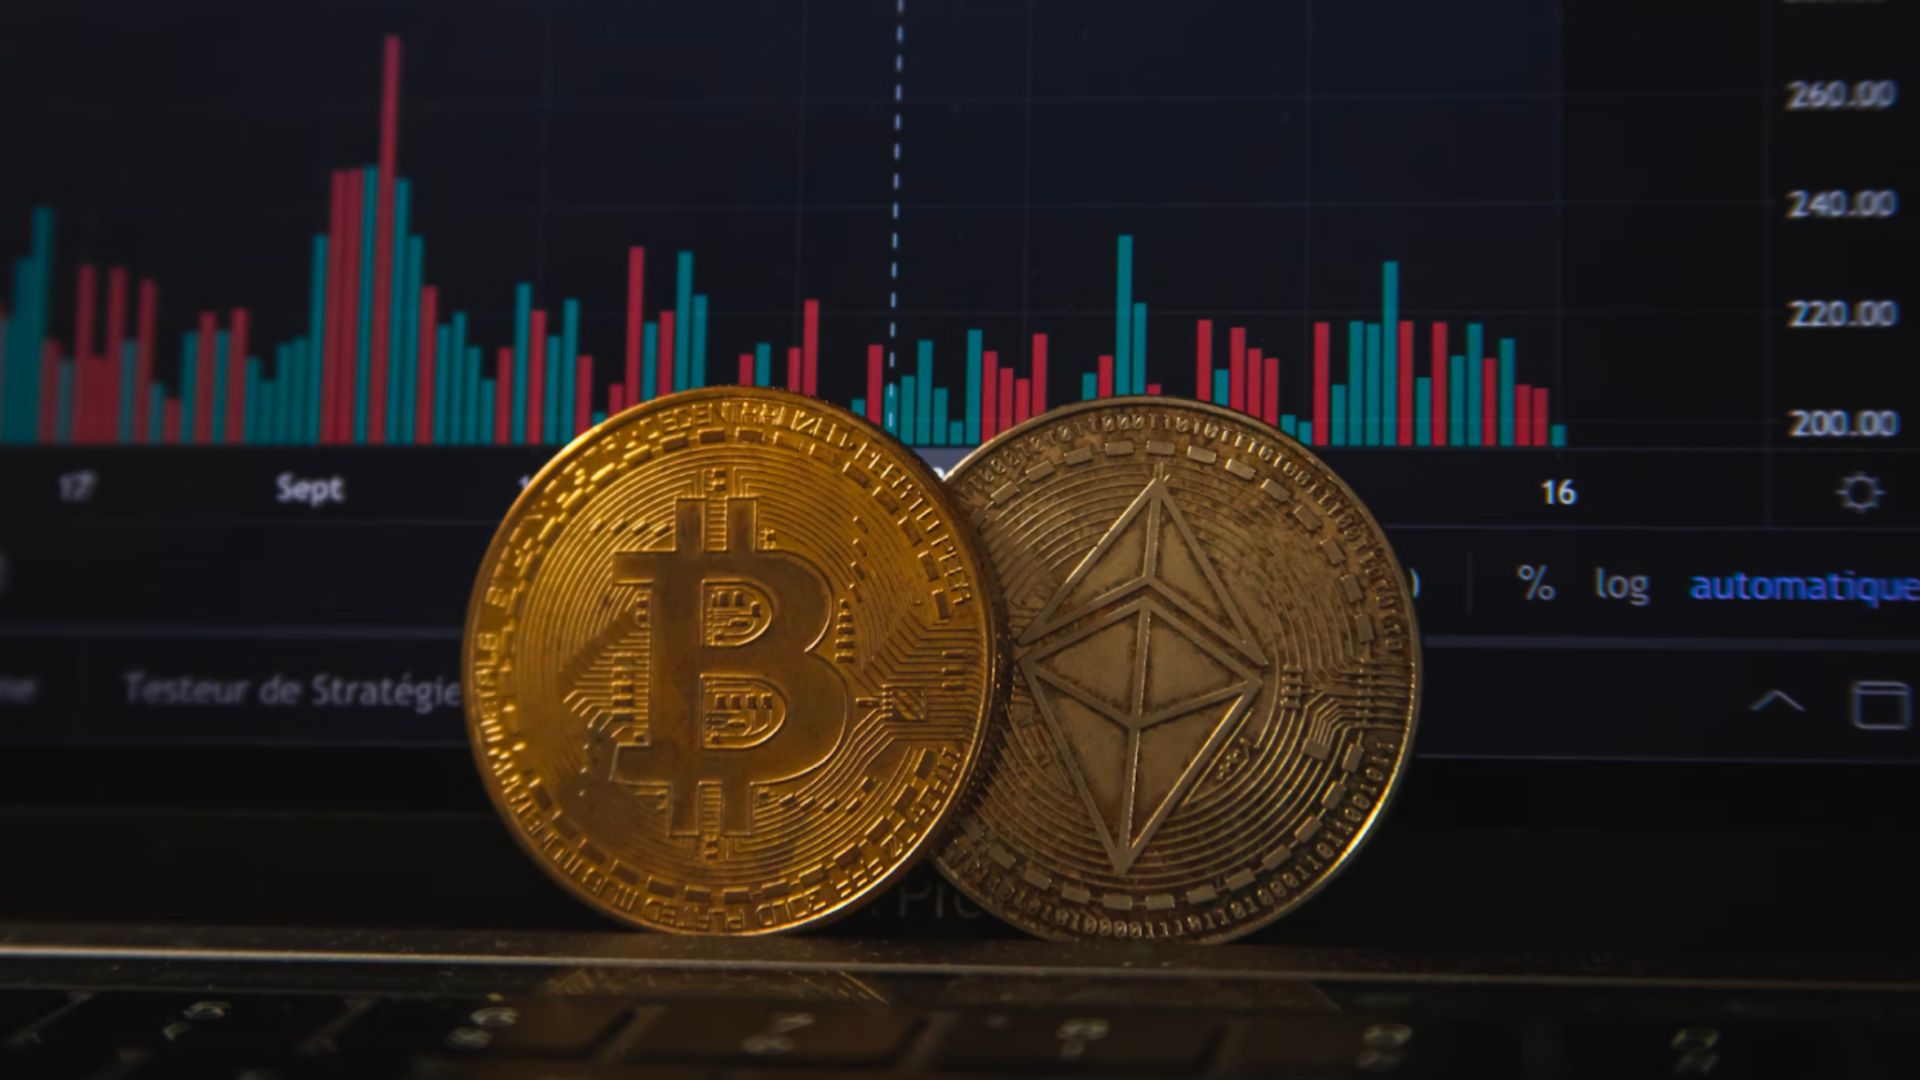 Cryptocurrency coins on a computer keyboard with a stock market graph in the background, symbolizing blockchain’s role in e-commerce trends, ensuring secure and transparent online transactions.